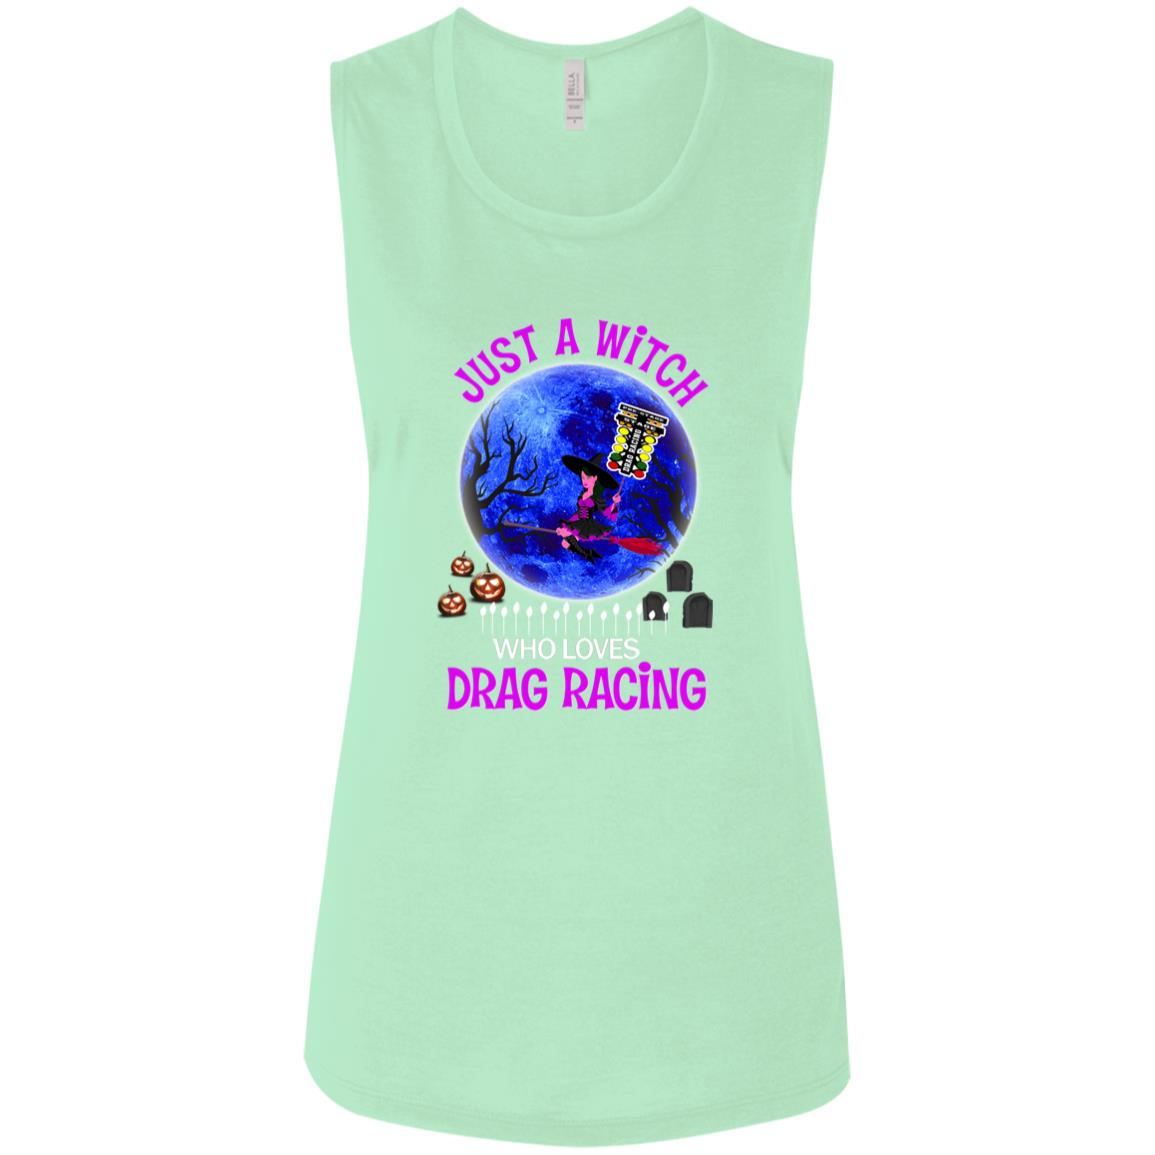 Just A Witch Who Loves Drag Racing Ladies' Flowy Muscle Tank